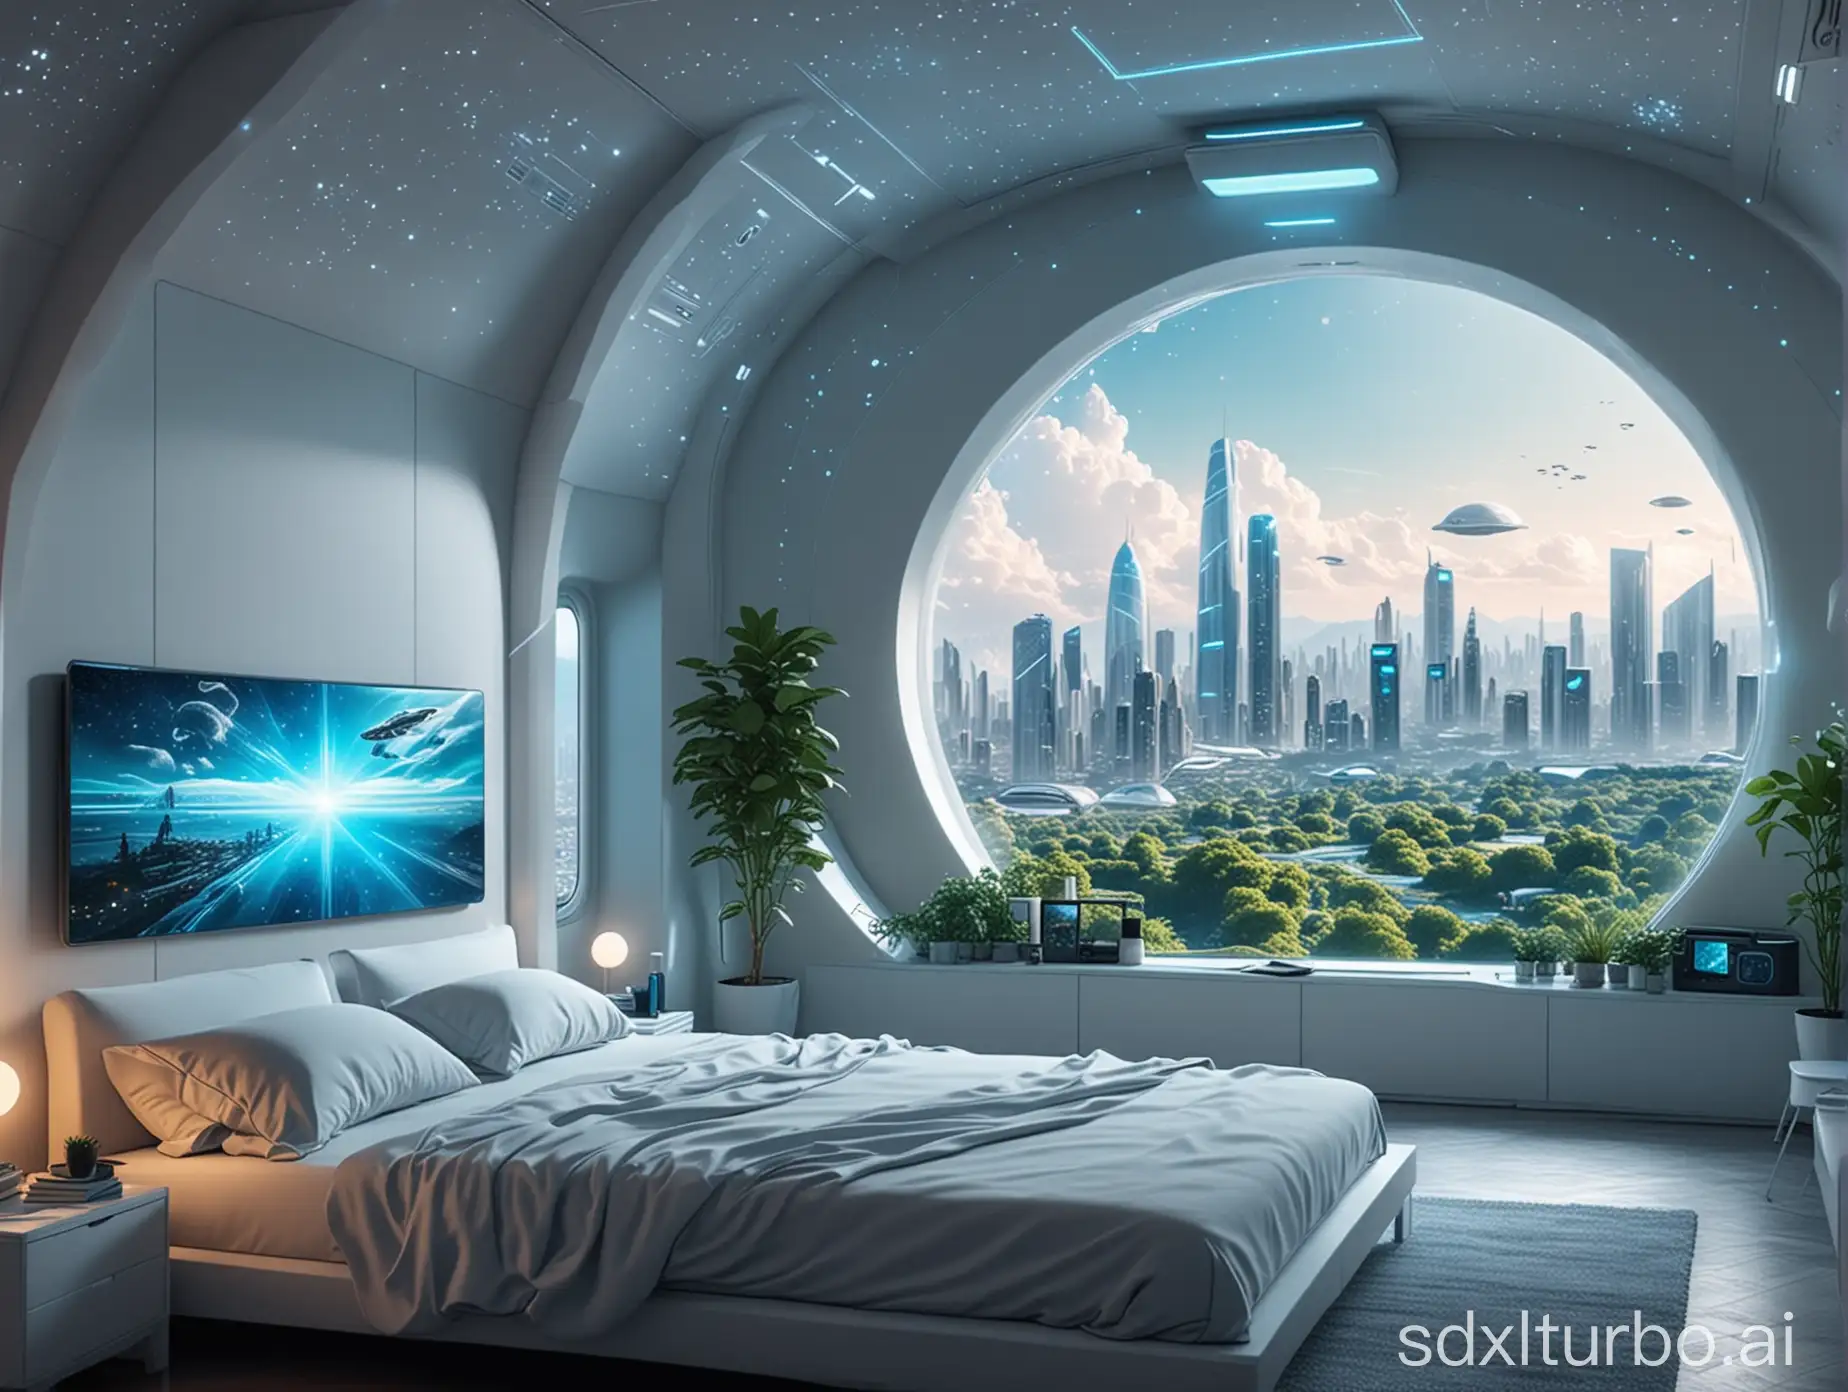 Futuristic-SciFi-Bedroom-with-Holographic-Assistant-and-City-Skyline-View